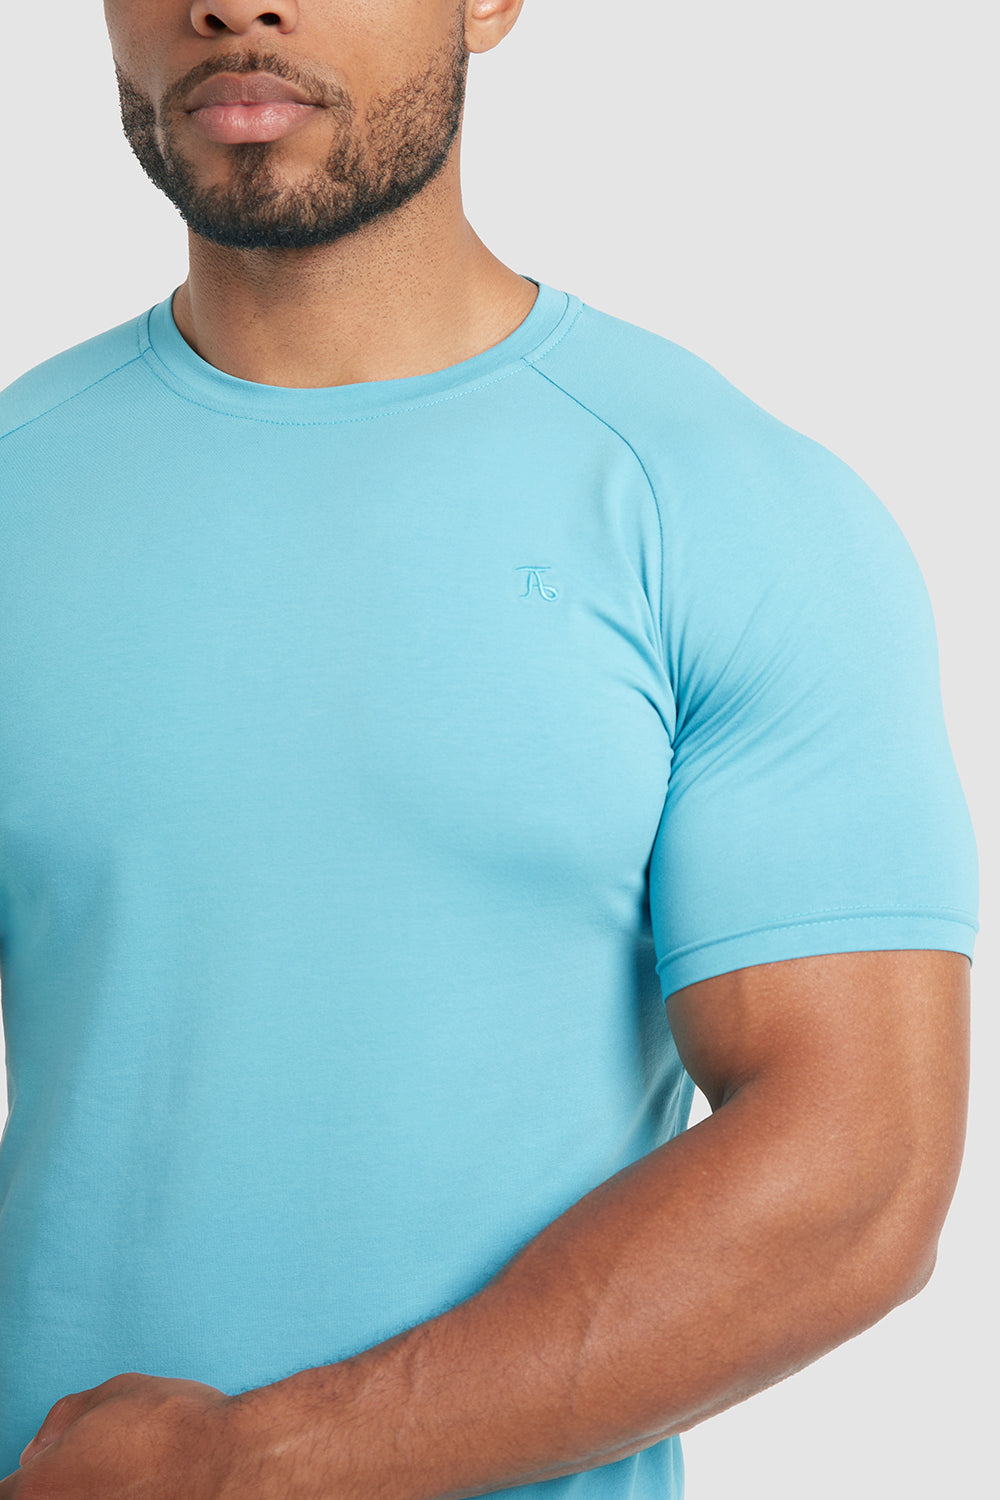 Muscle Fit T-Shirt in Mallard - TAILORED ATHLETE - ROW